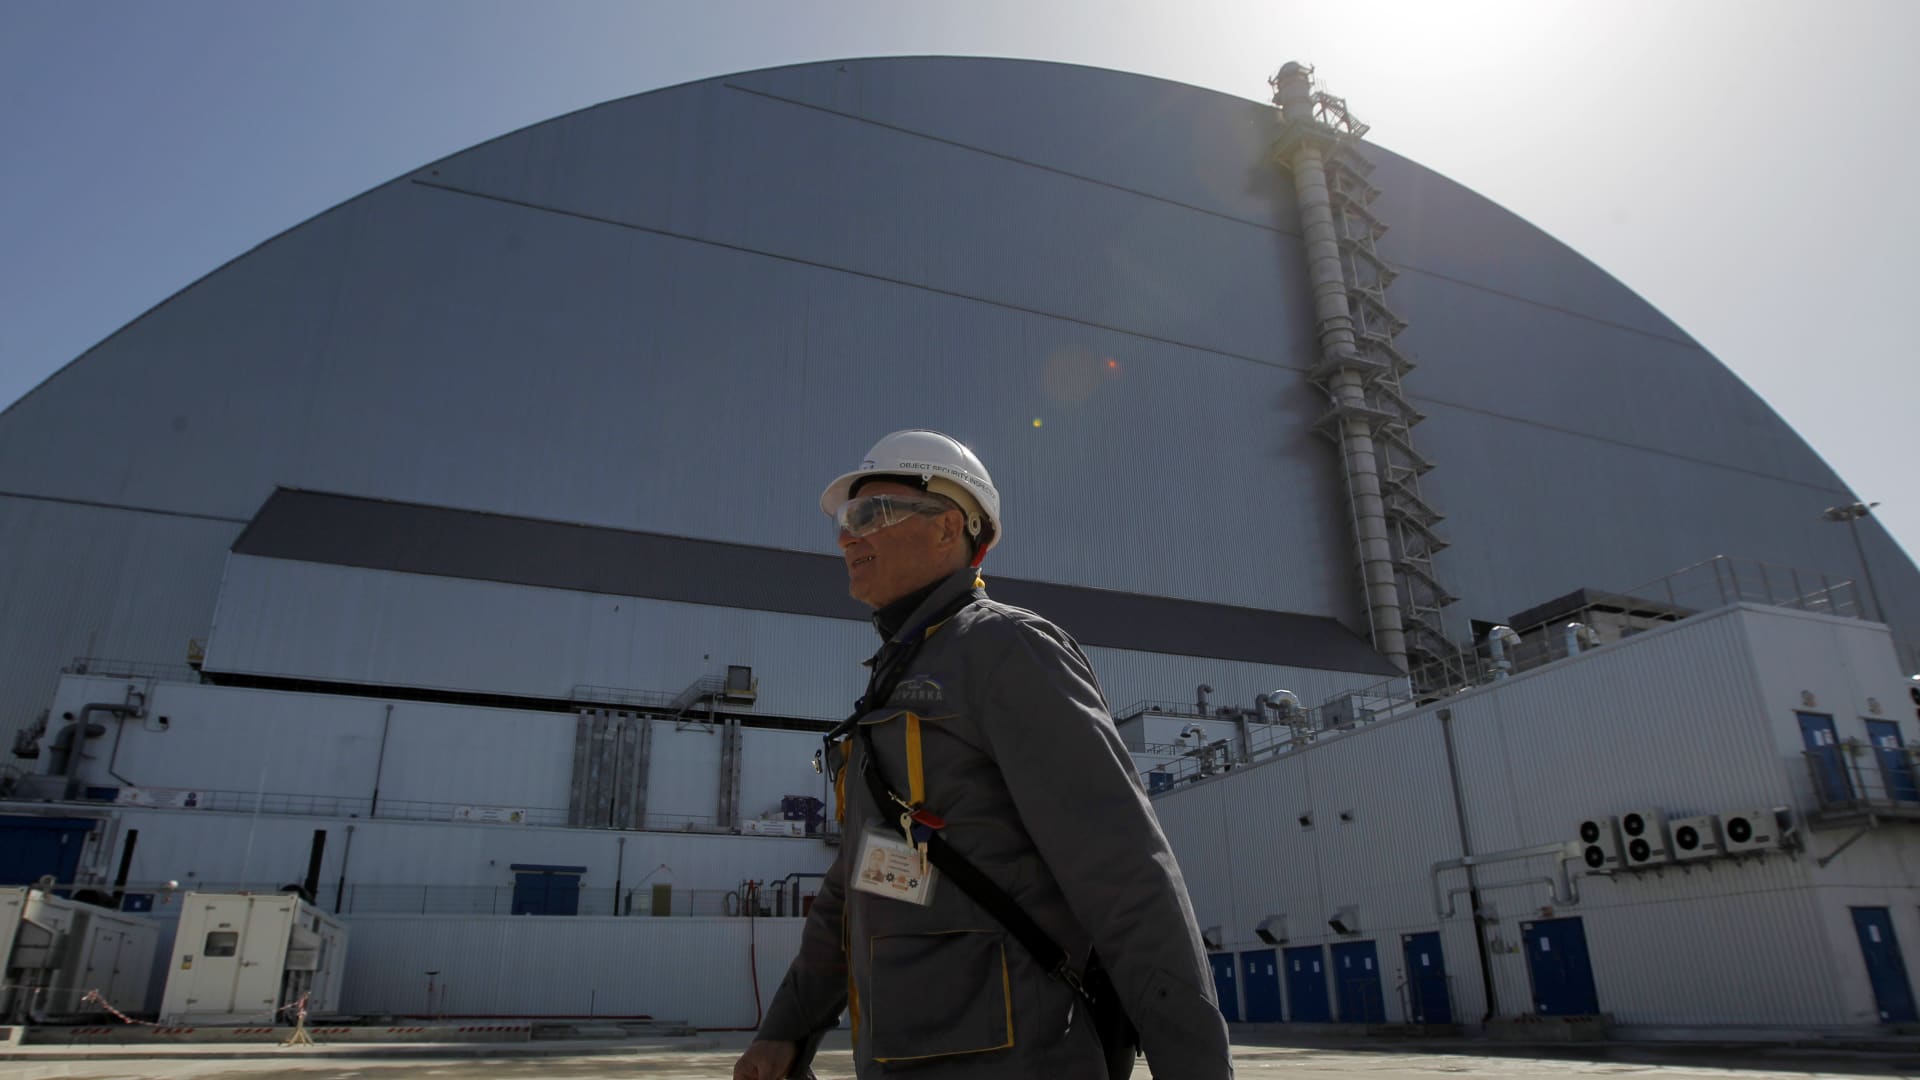 A worker walks in front of new protective shelter over the 4 nuclear reactor Unit at Chernobyl nuclear power plant in Kiev region, Ukraine, on 26 April, 2019.